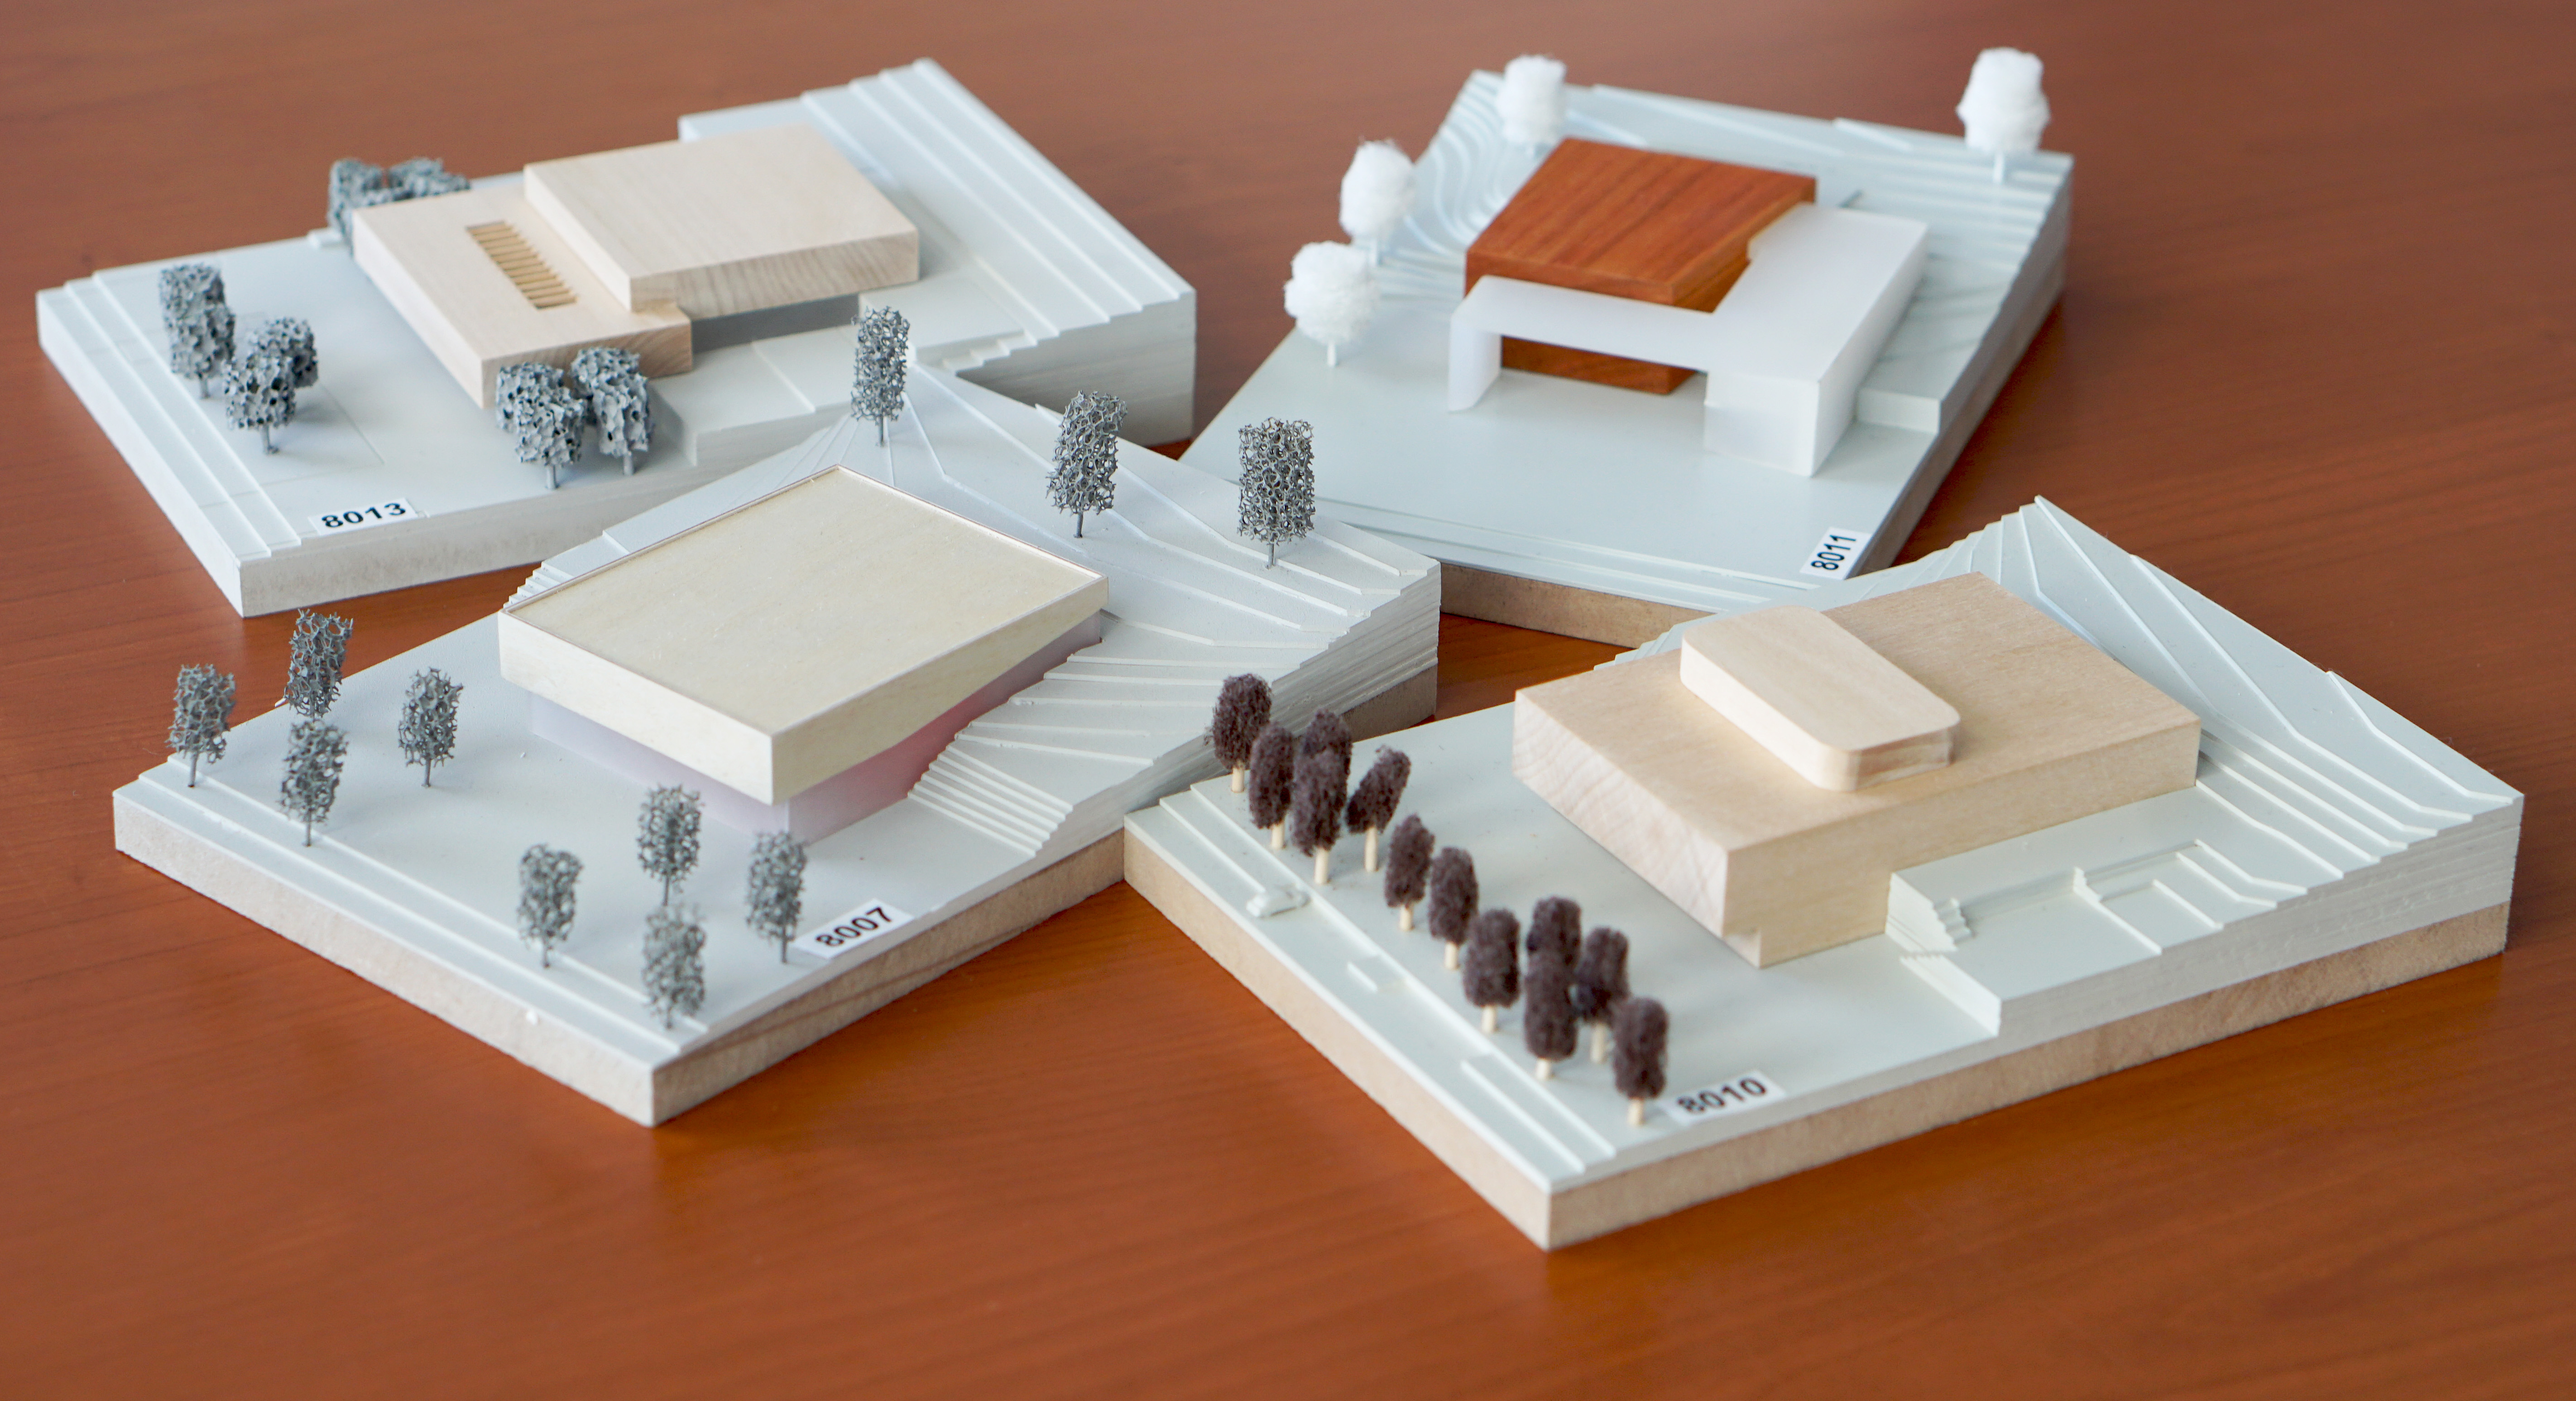 Four models for the new building at the architecture contest